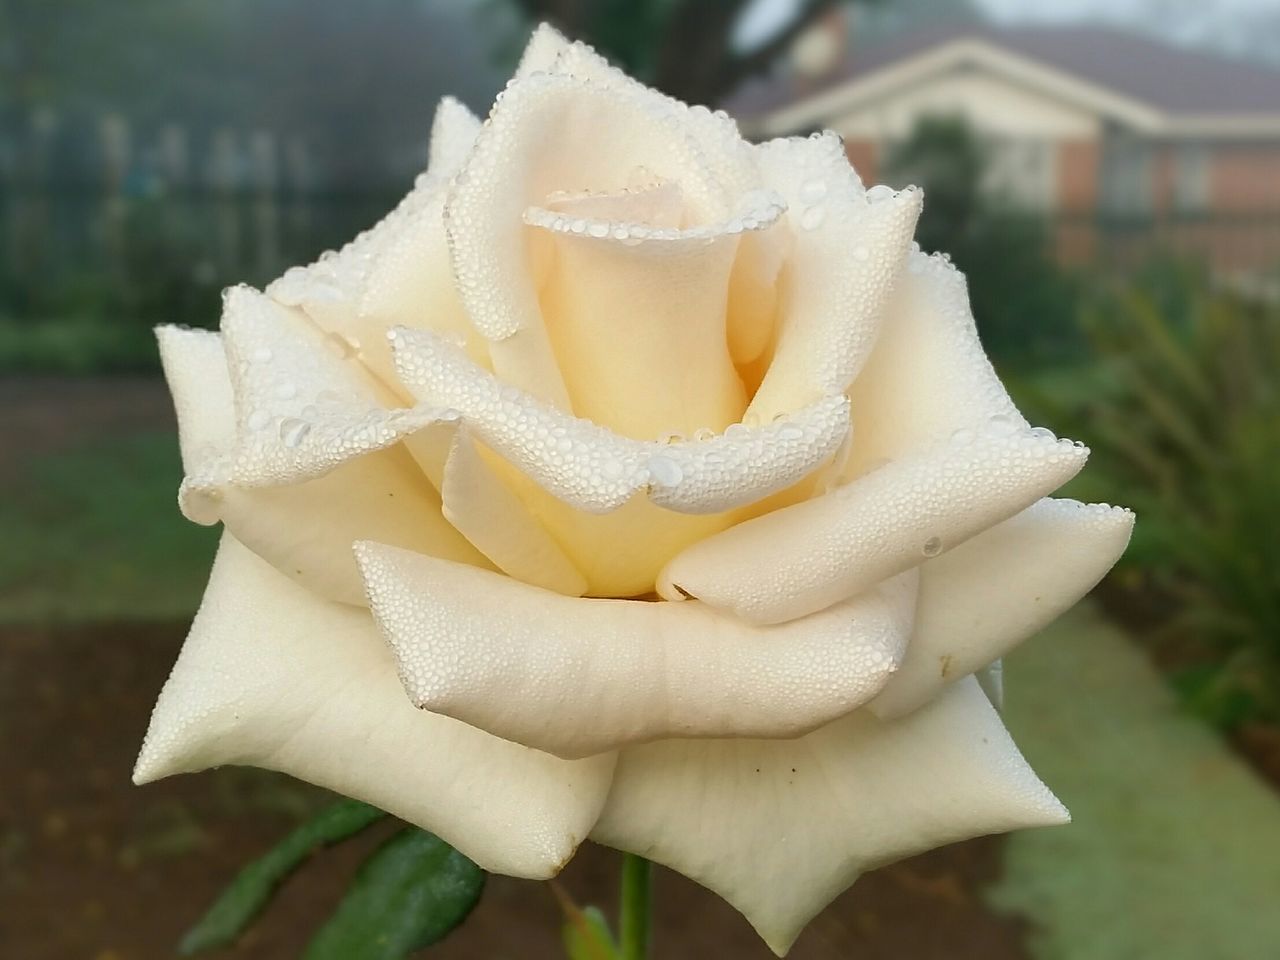 Roses drinking in the dew